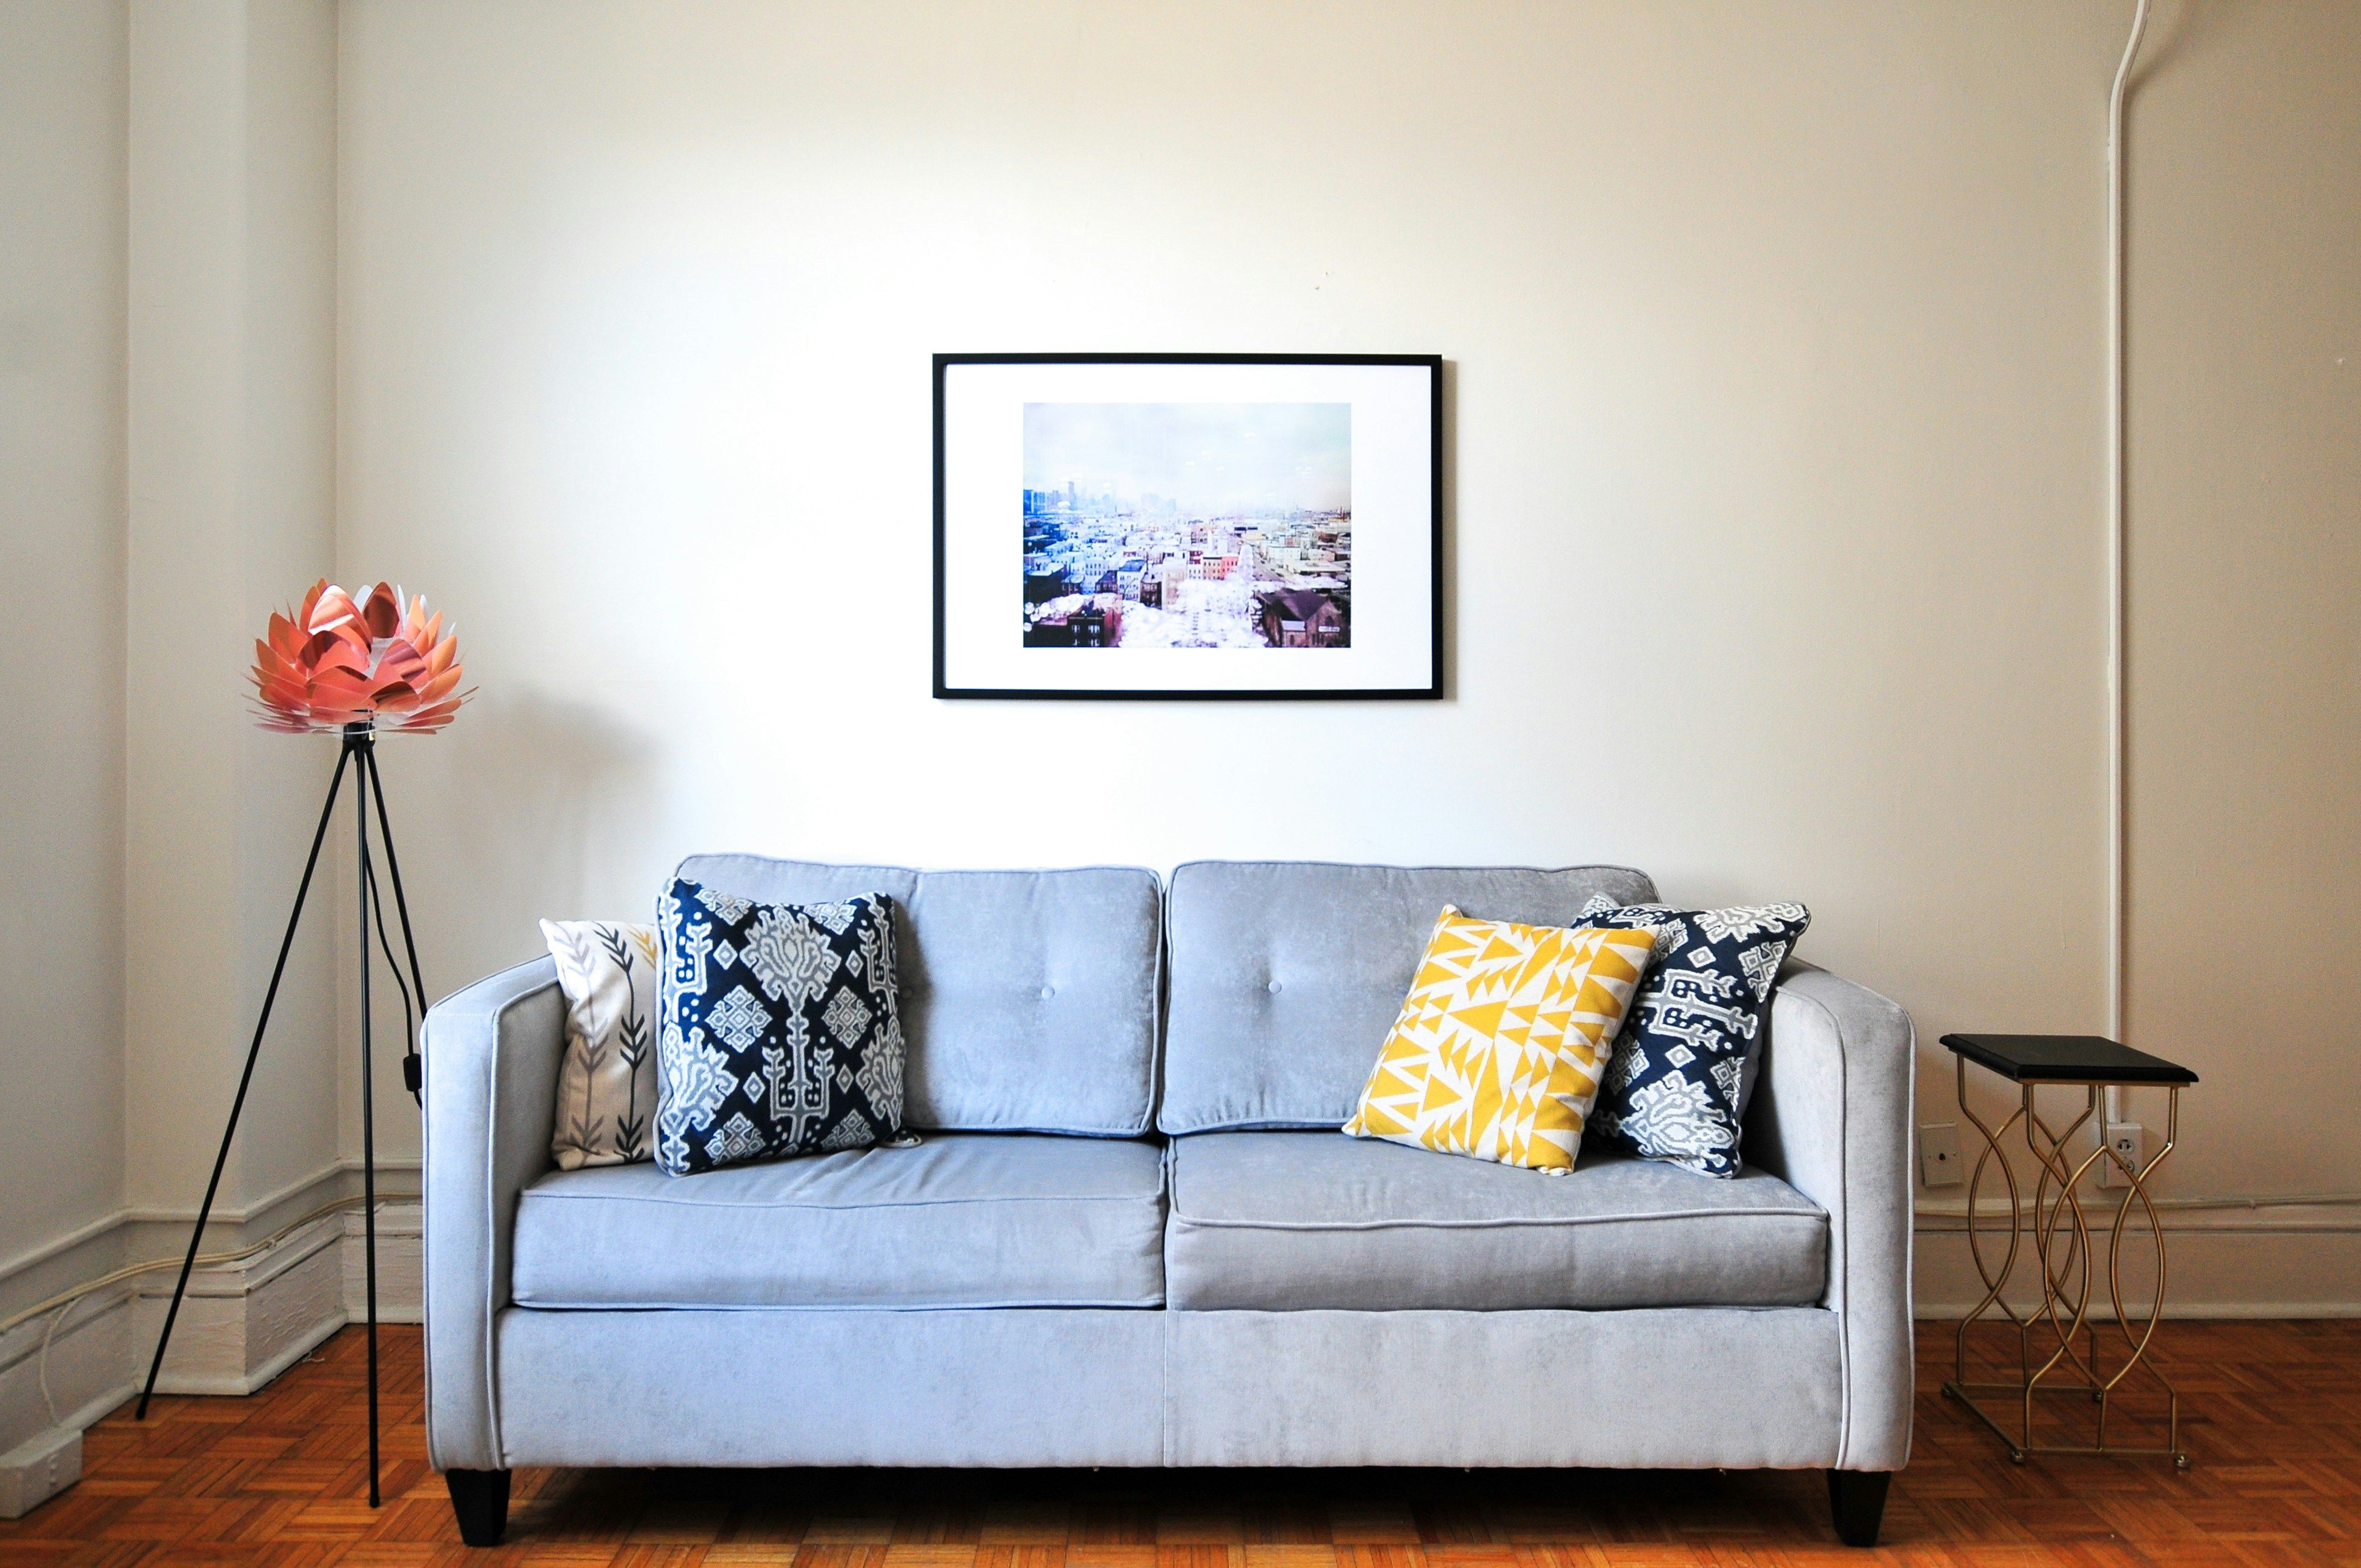 A light gray couch with ornate blue and yellow pillows, with a framed piece of art on the wall and a floral decoration on the left side.